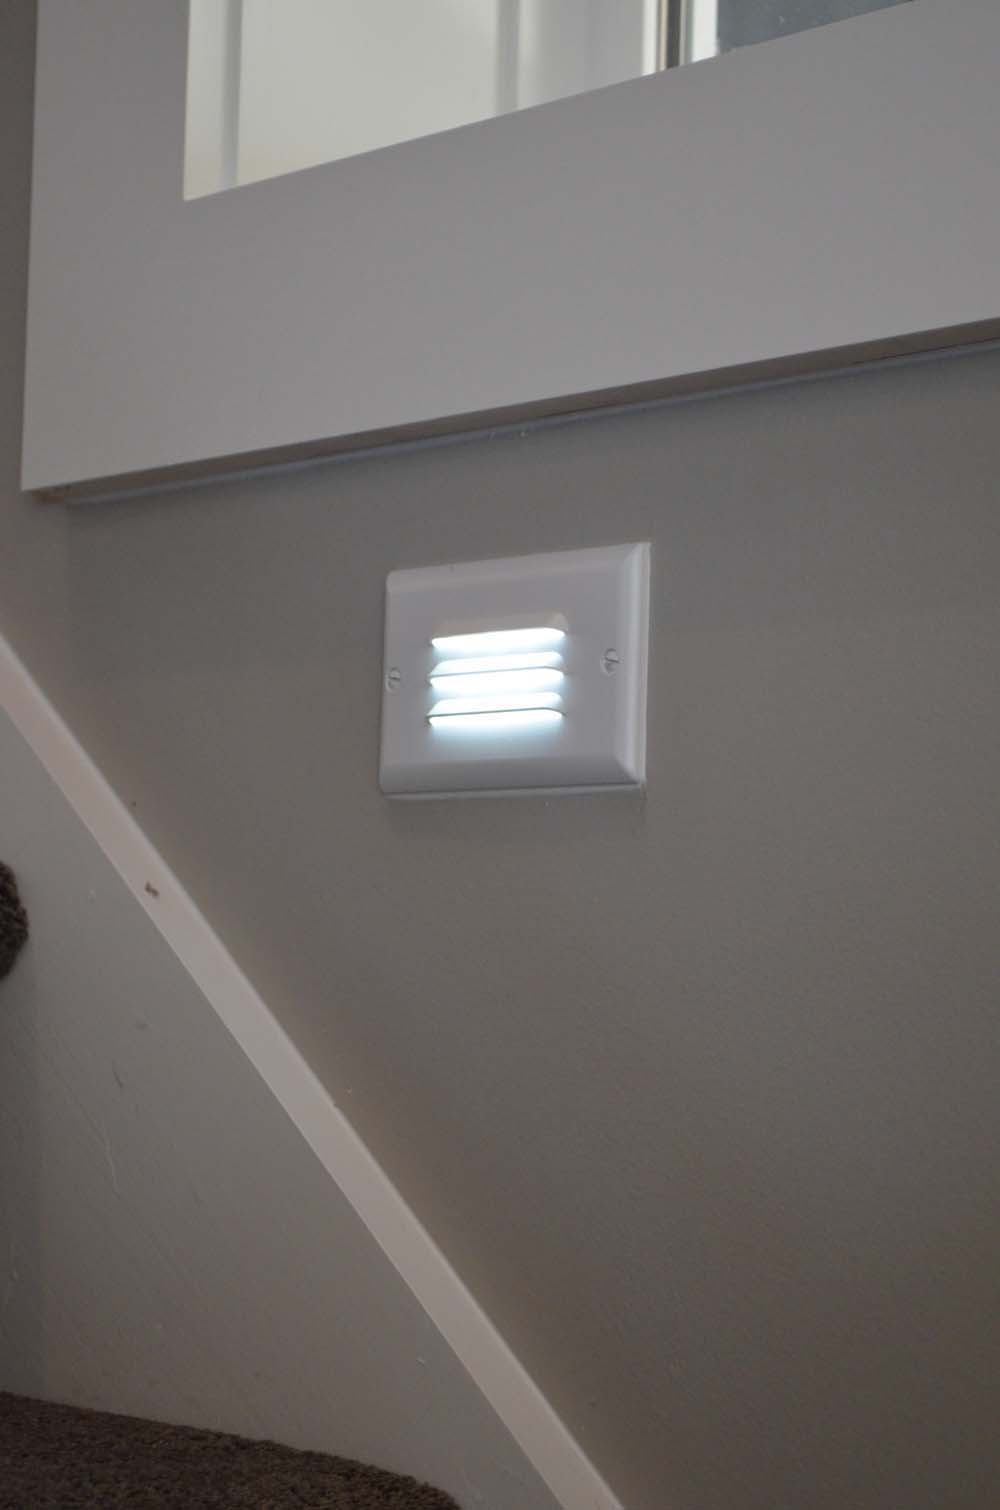 Recessed step light on side wall